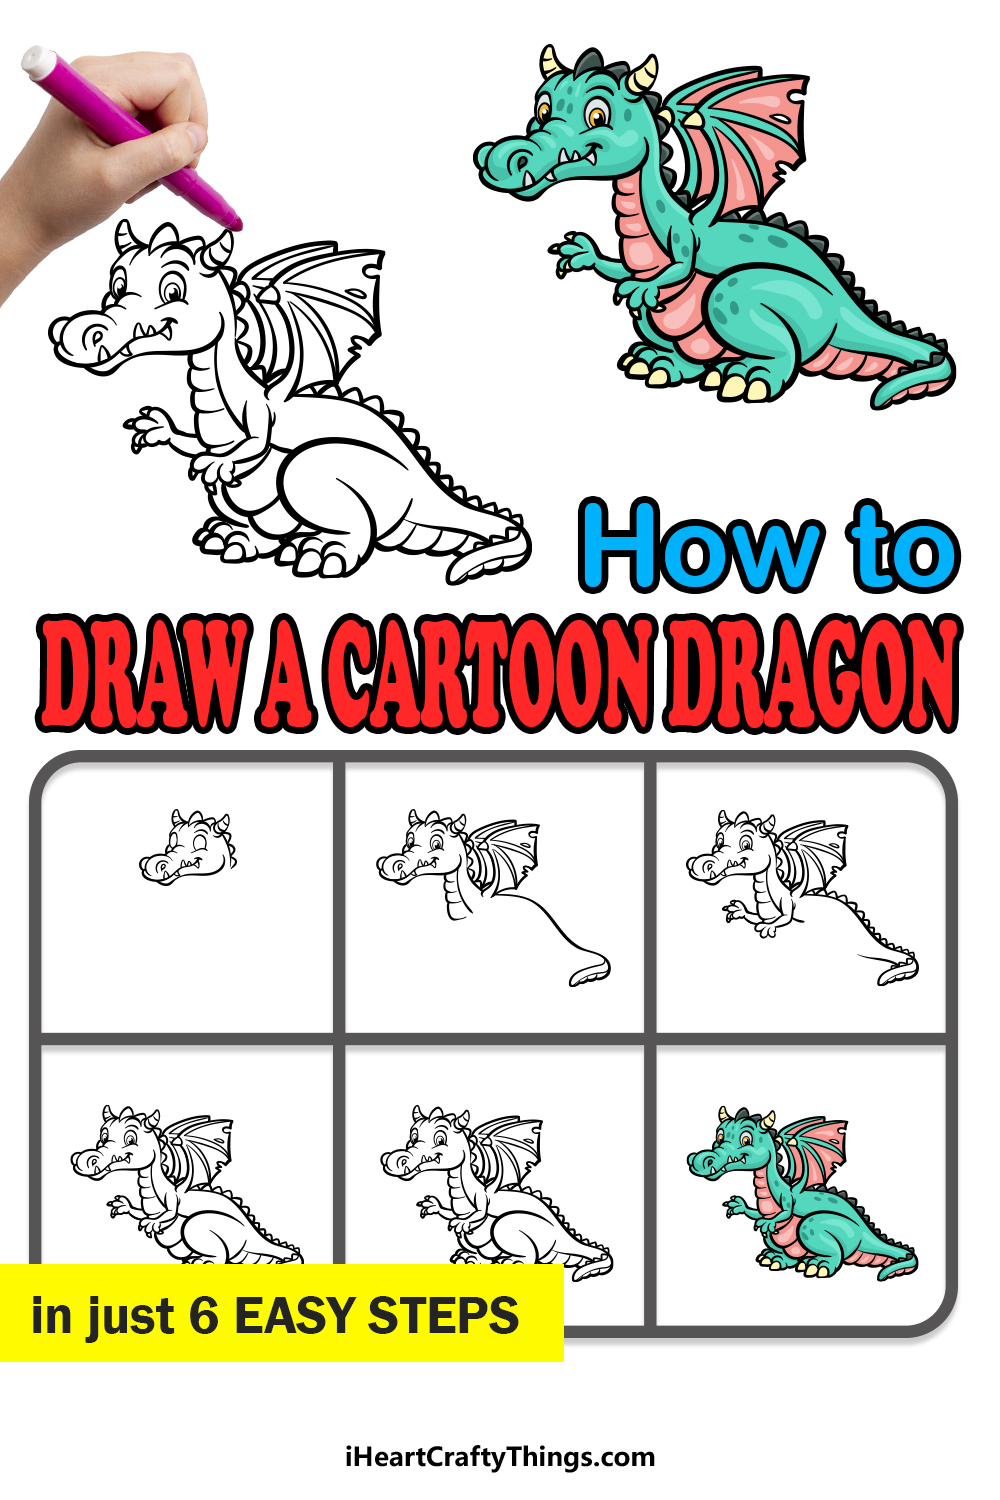 how to draw a cartoon dragon in 6 easy steps